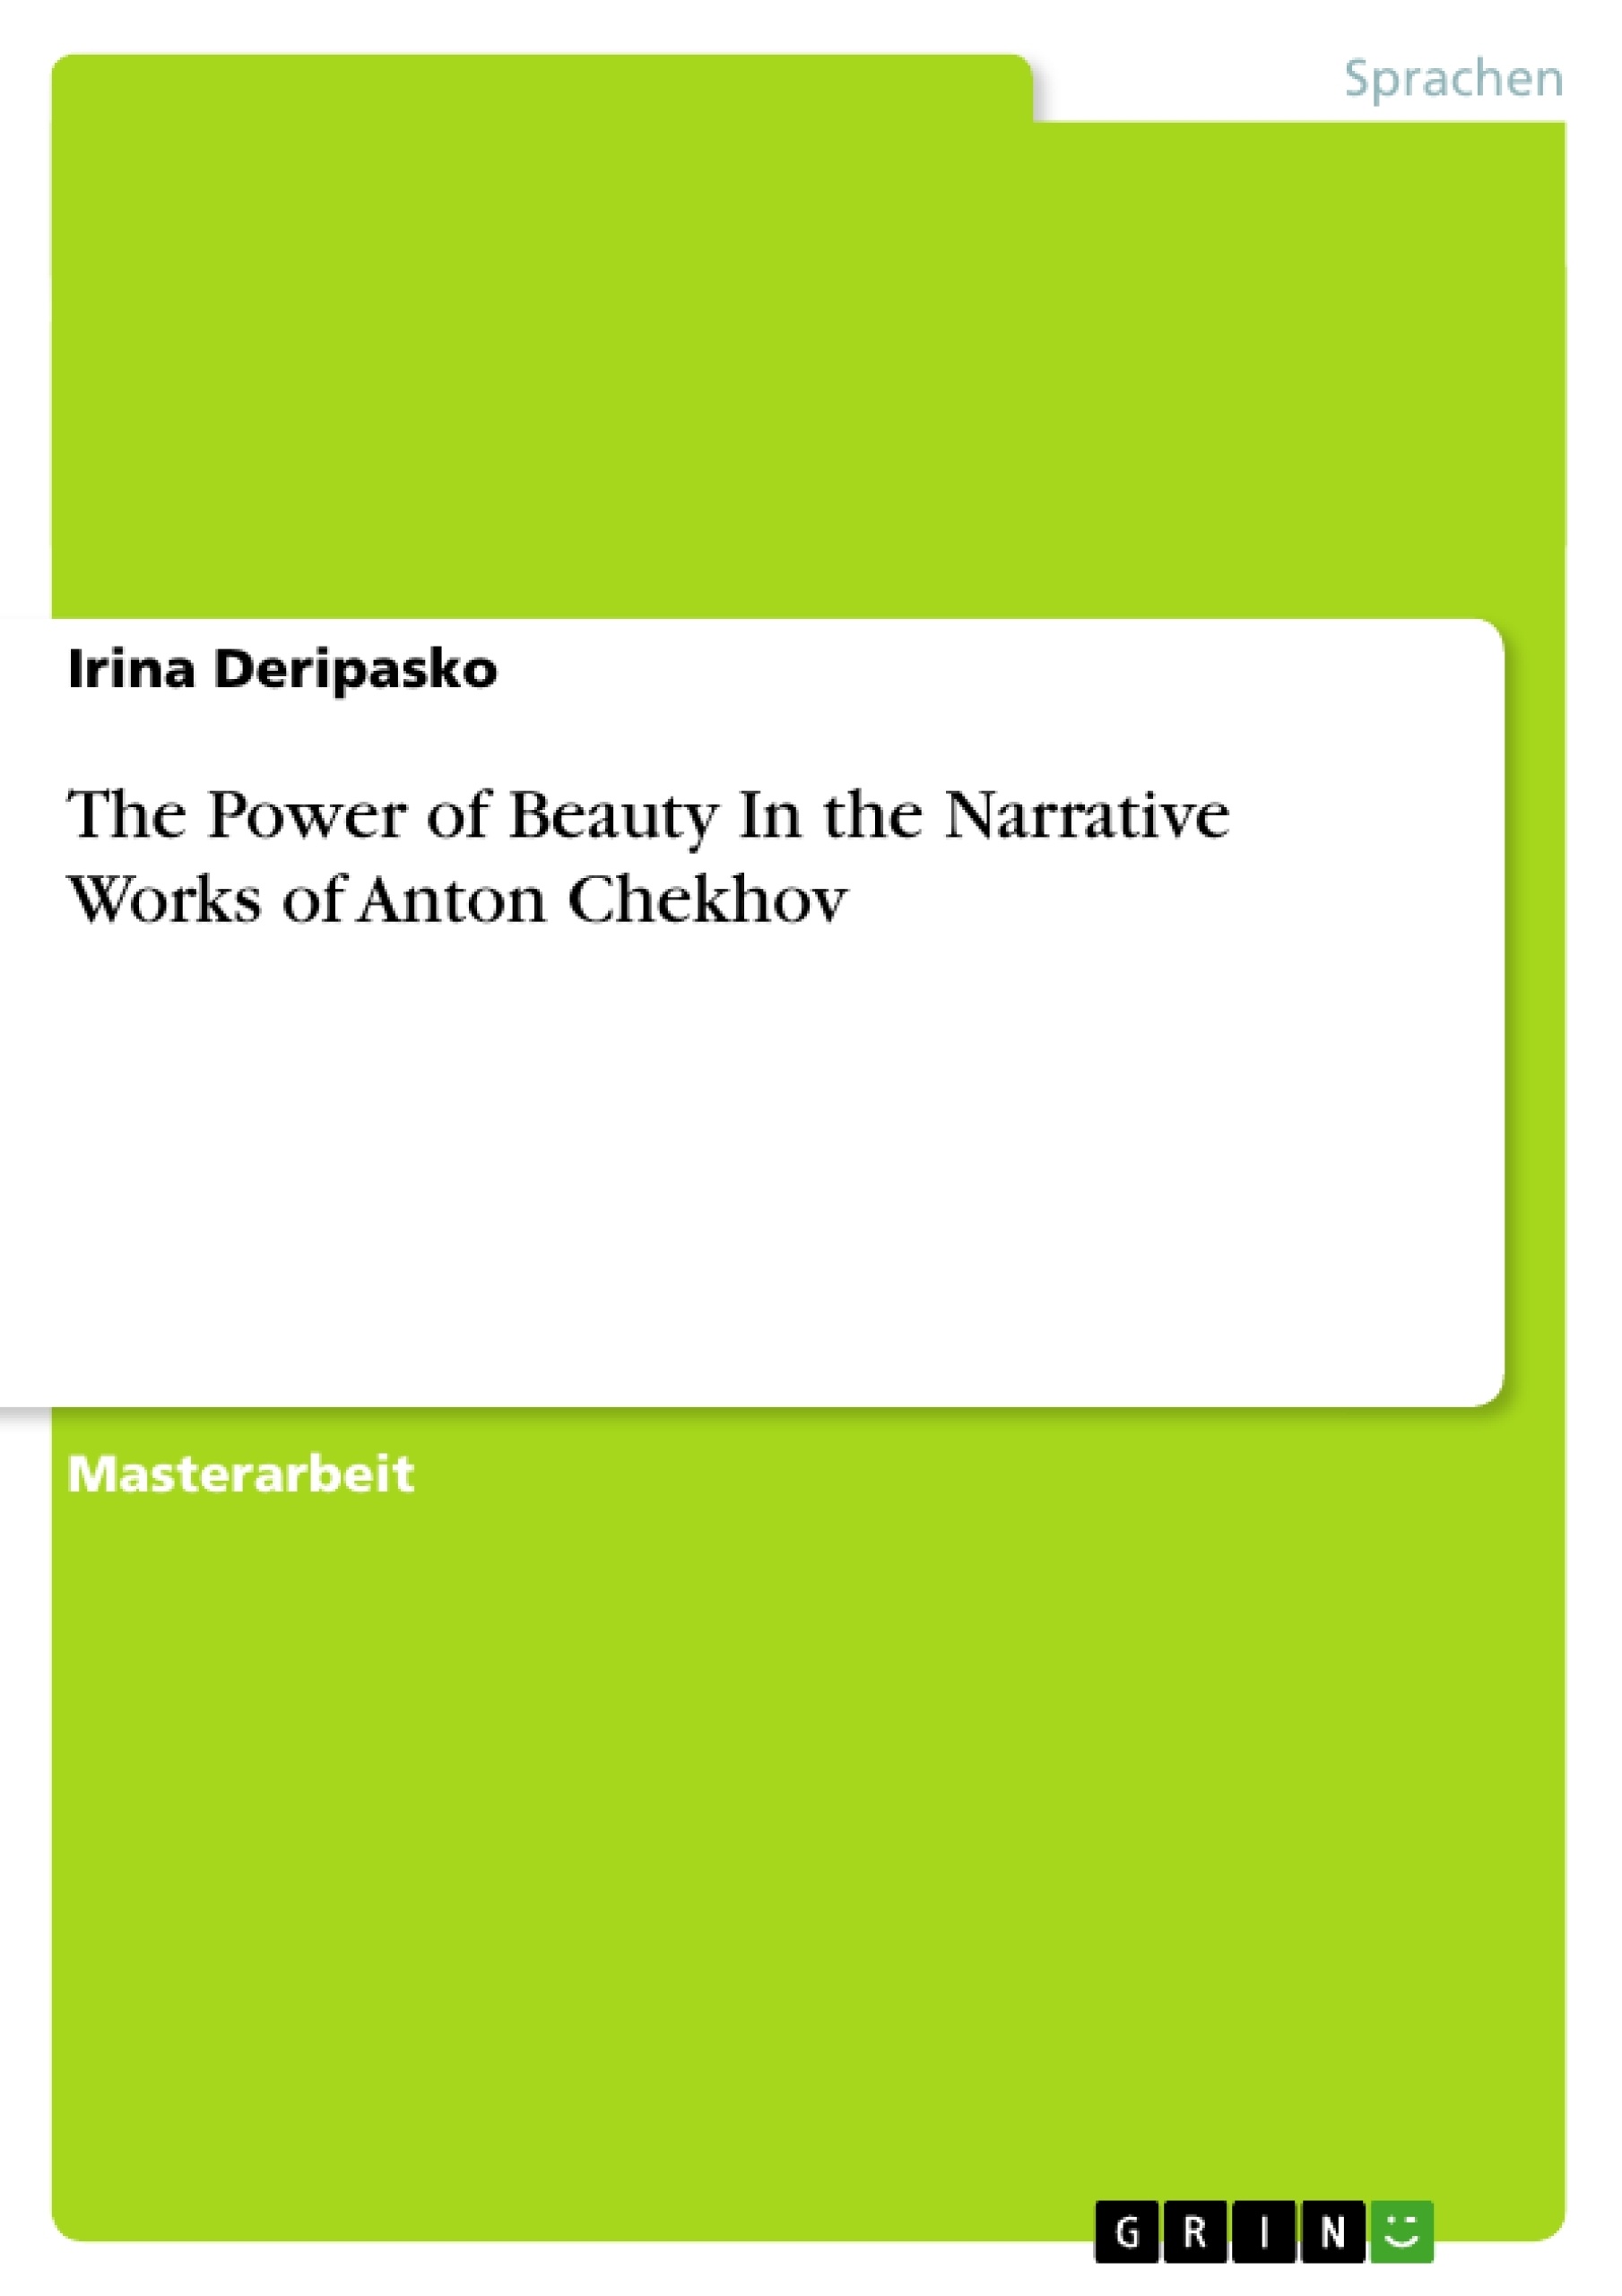 Titel: The Power of Beauty In the Narrative Works of Anton Chekhov